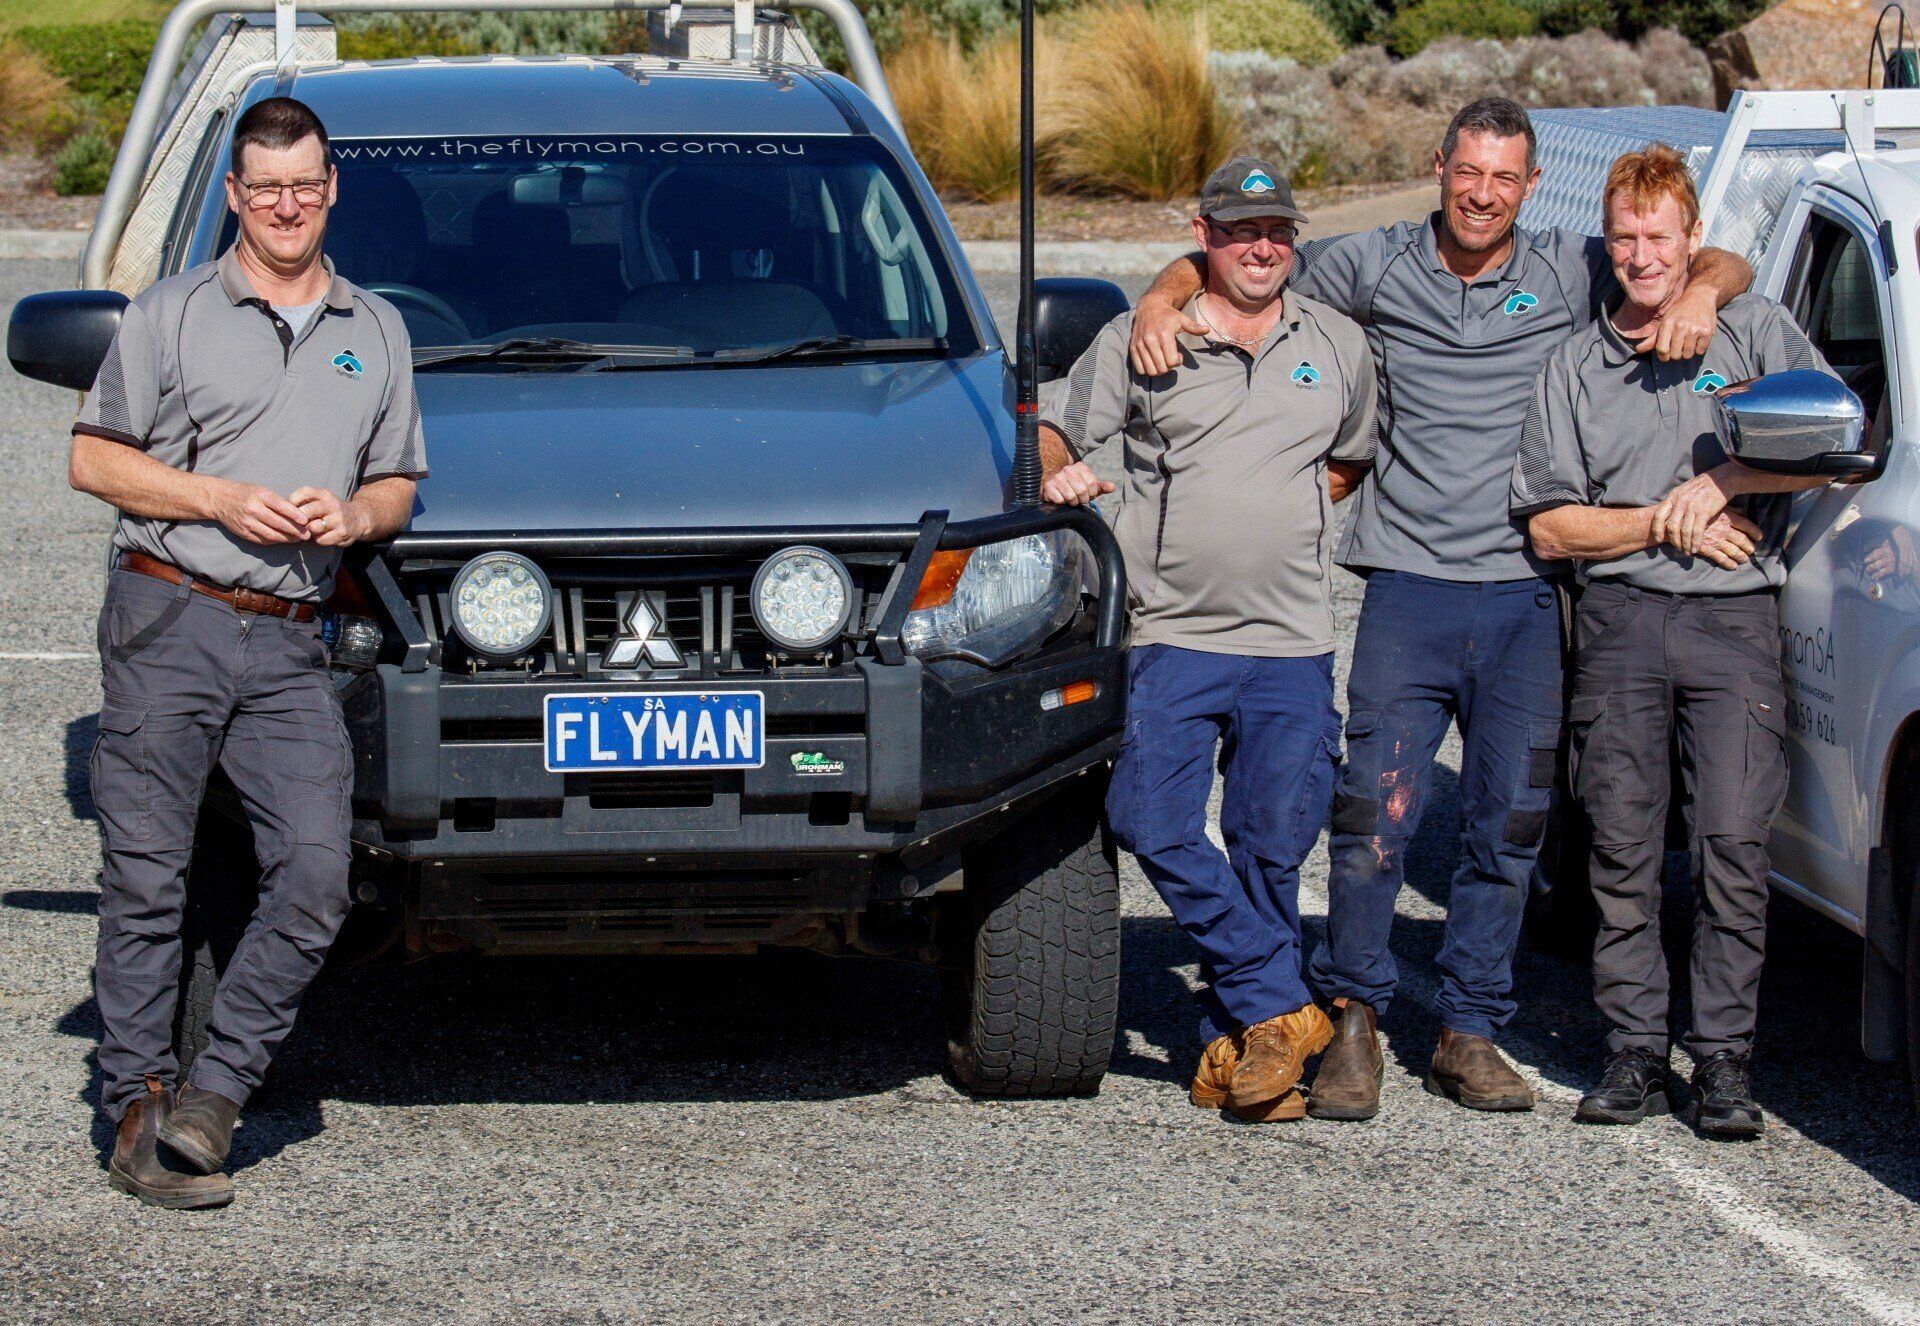 Pt lincoln, whyalla & eyre peninsula pest management